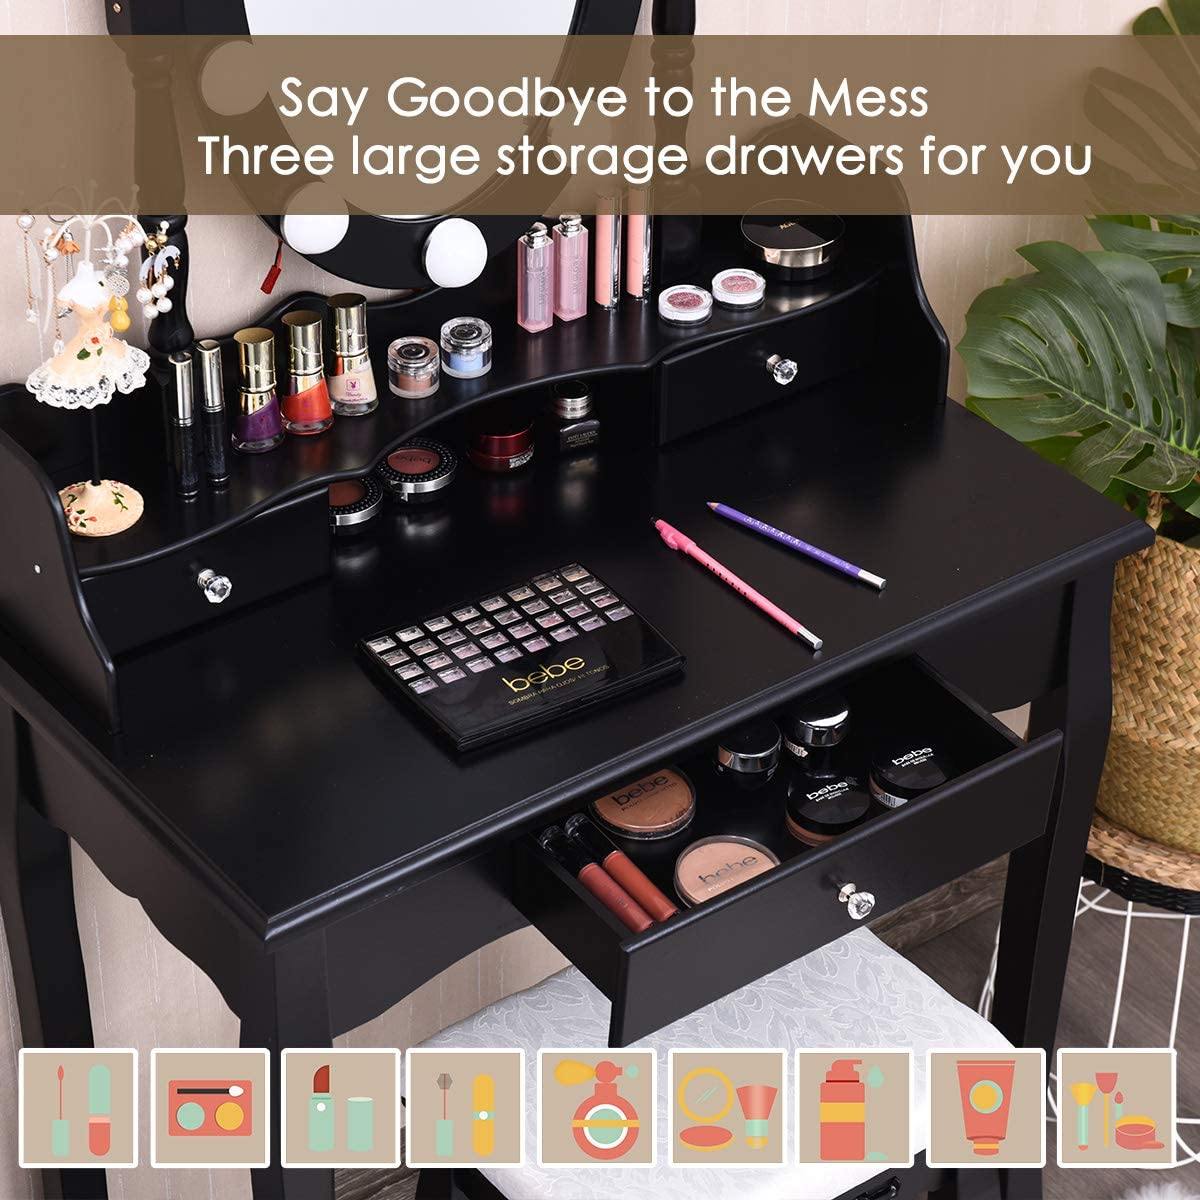 CHARMAID | Vanity Set with Lighted Oval Mirror, Makeup Dressing Table with 10 LED Dimmable Bulbs and 3 Drawers - Giantexus